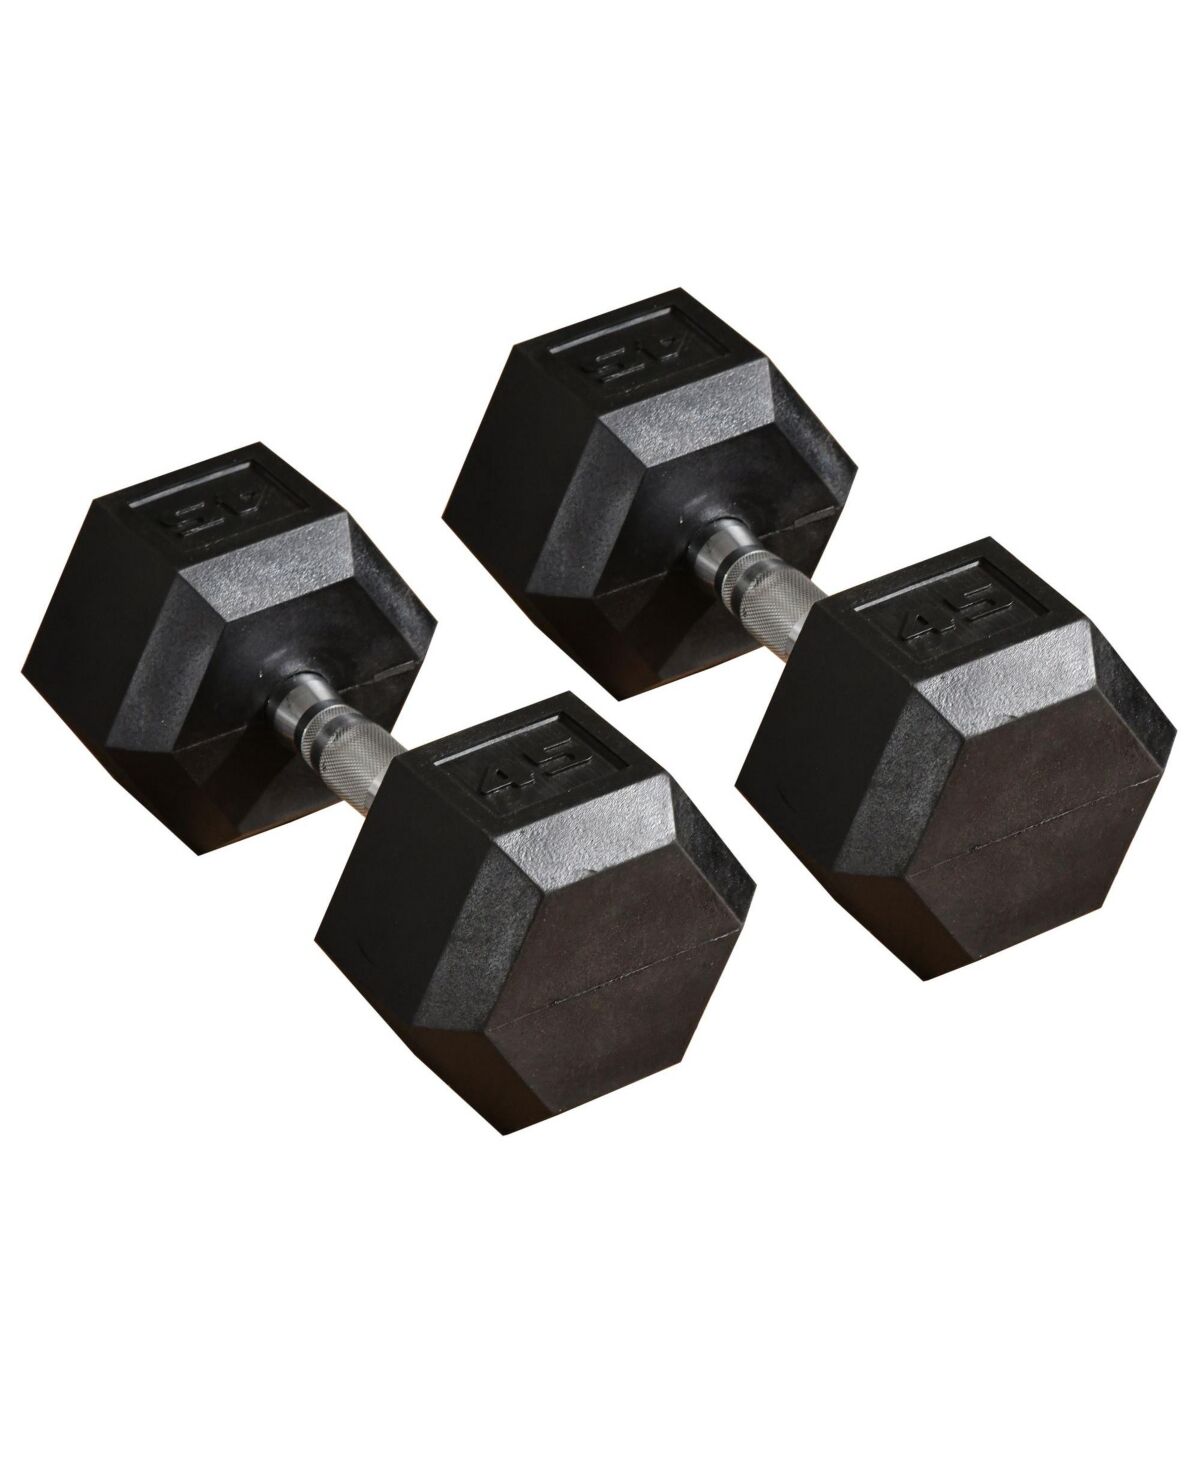 Soozier Hex Dumbbells Set, Rubber Hand Weights with Non-Slip Handles, Anti-roll, for Women or Men Home Gym Workout, 2 x 45lbs - Black